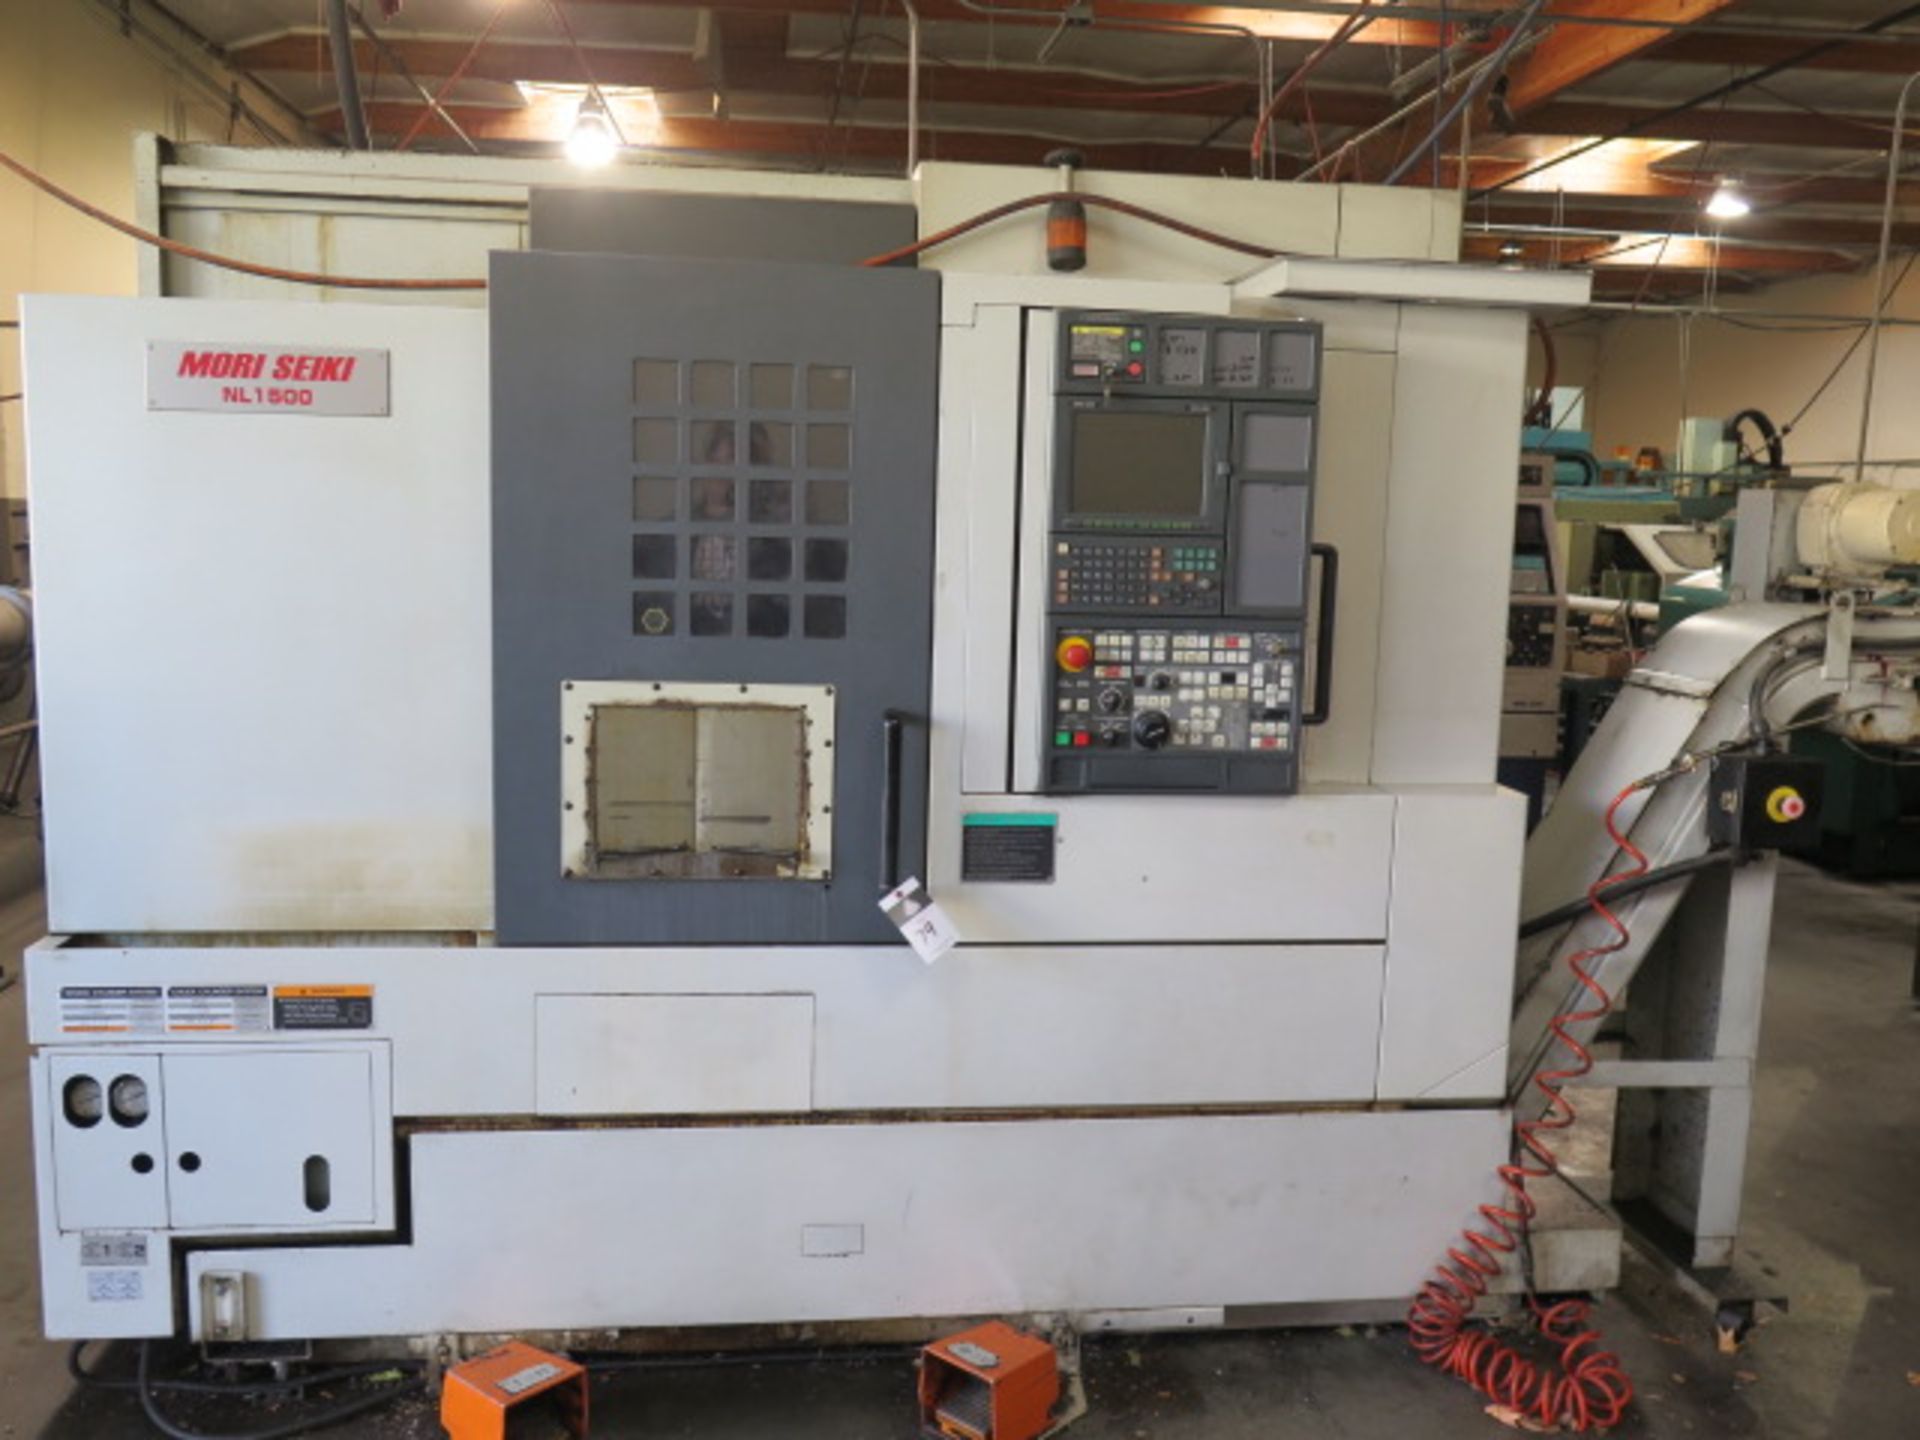 2005 Mori Seiki NL1500 S/500 Twin Spindle CNC Turning Center s/n NL151E01356, SOLD AS IS